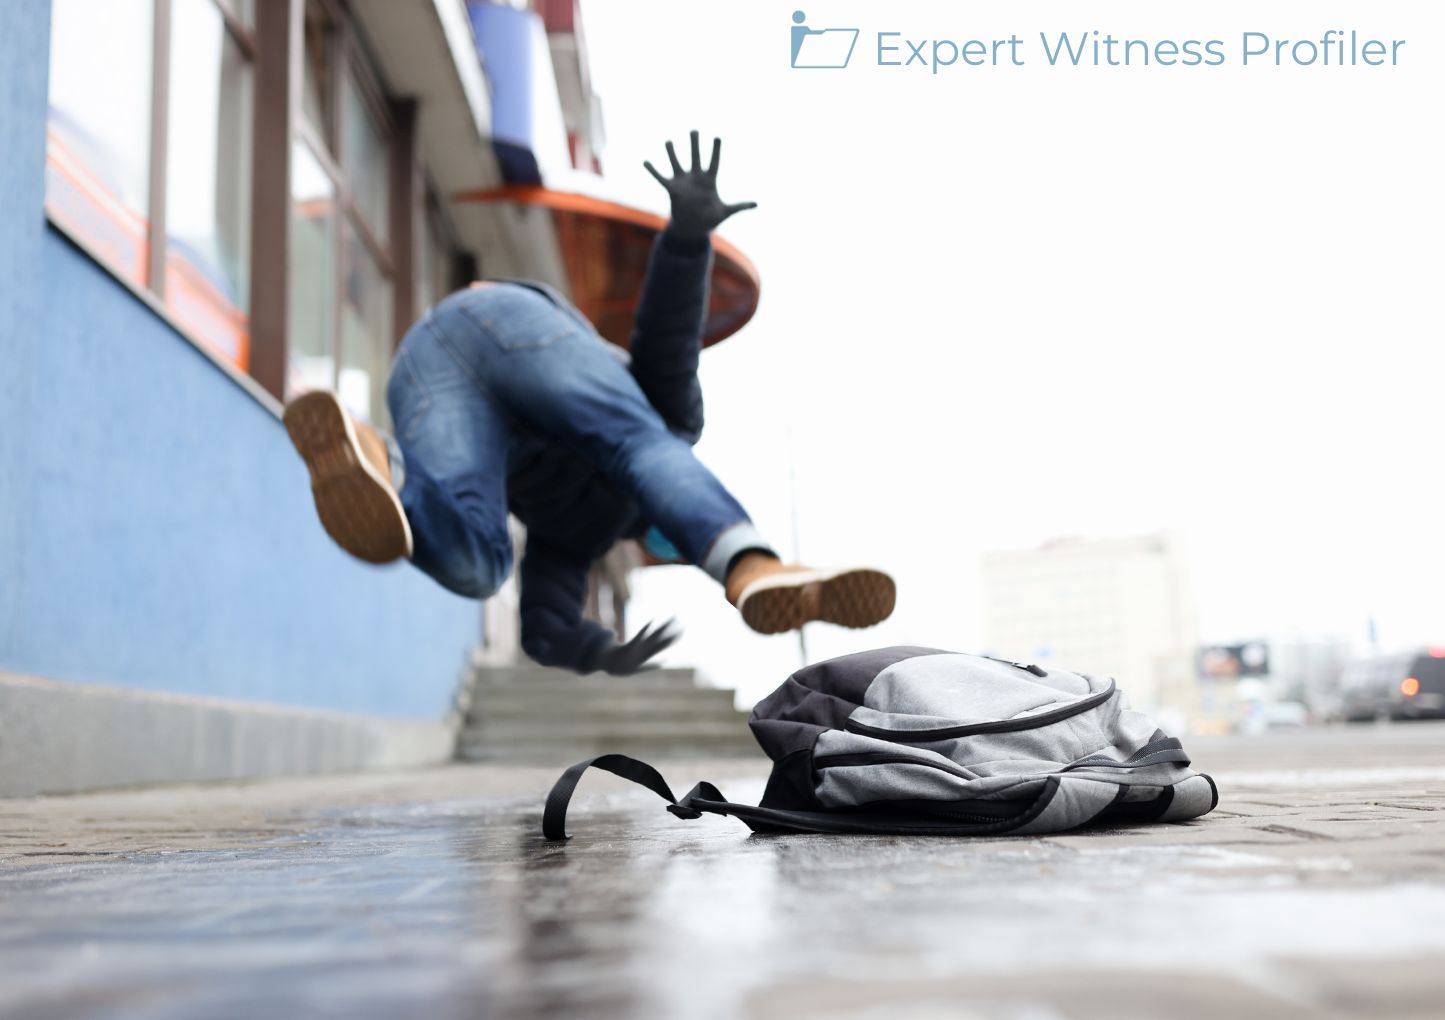 Court rejects the testimony of the Construction Expert Witness for not conducting site examination of any kind after a slip and fall accident